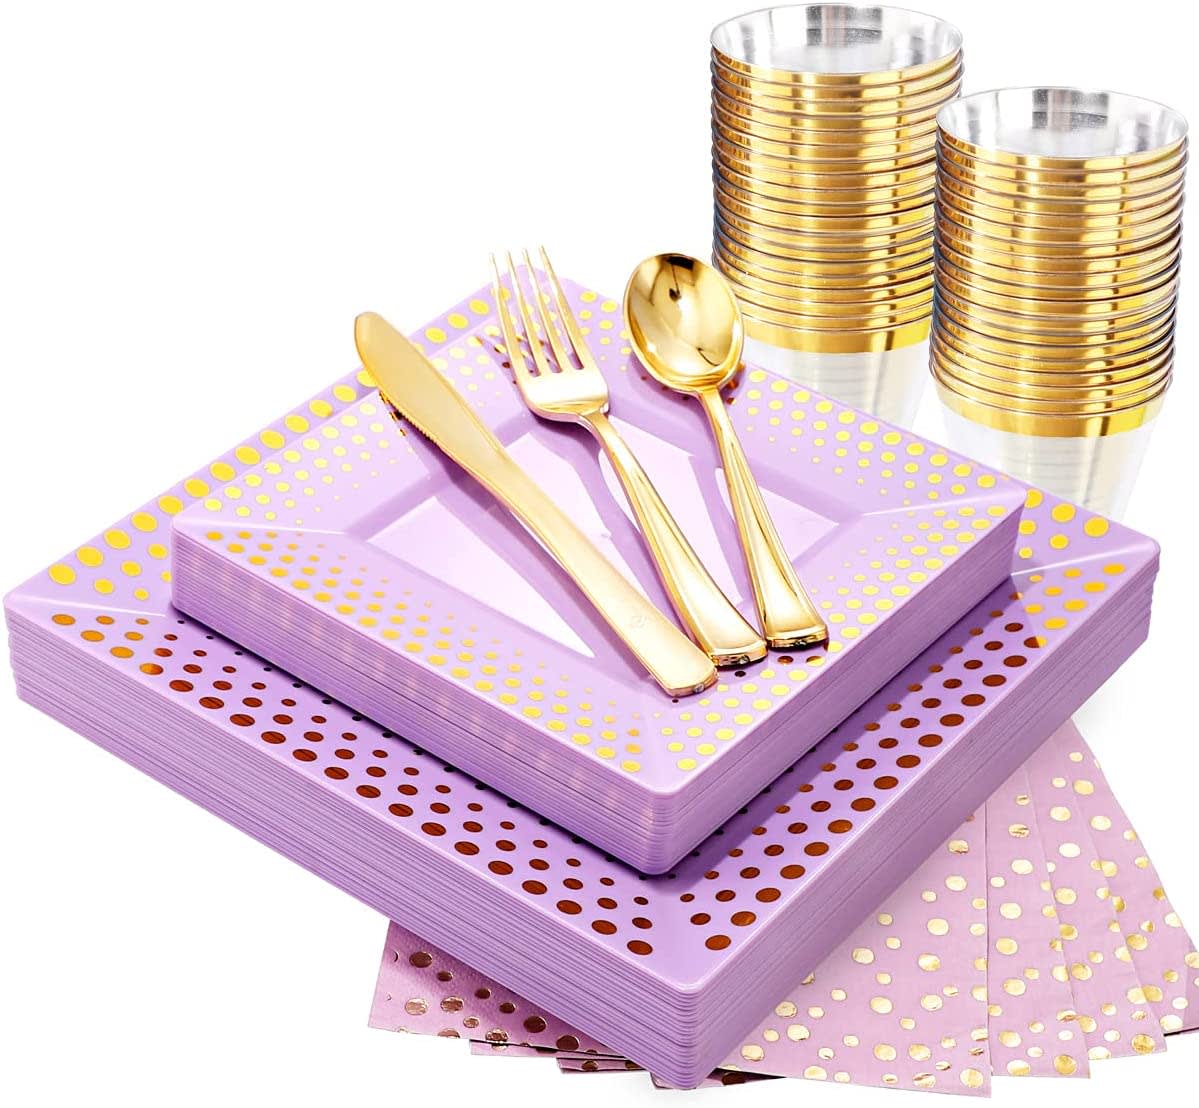 Purple Plastic Plates with Gold Dot &Gold Disposable Silverware